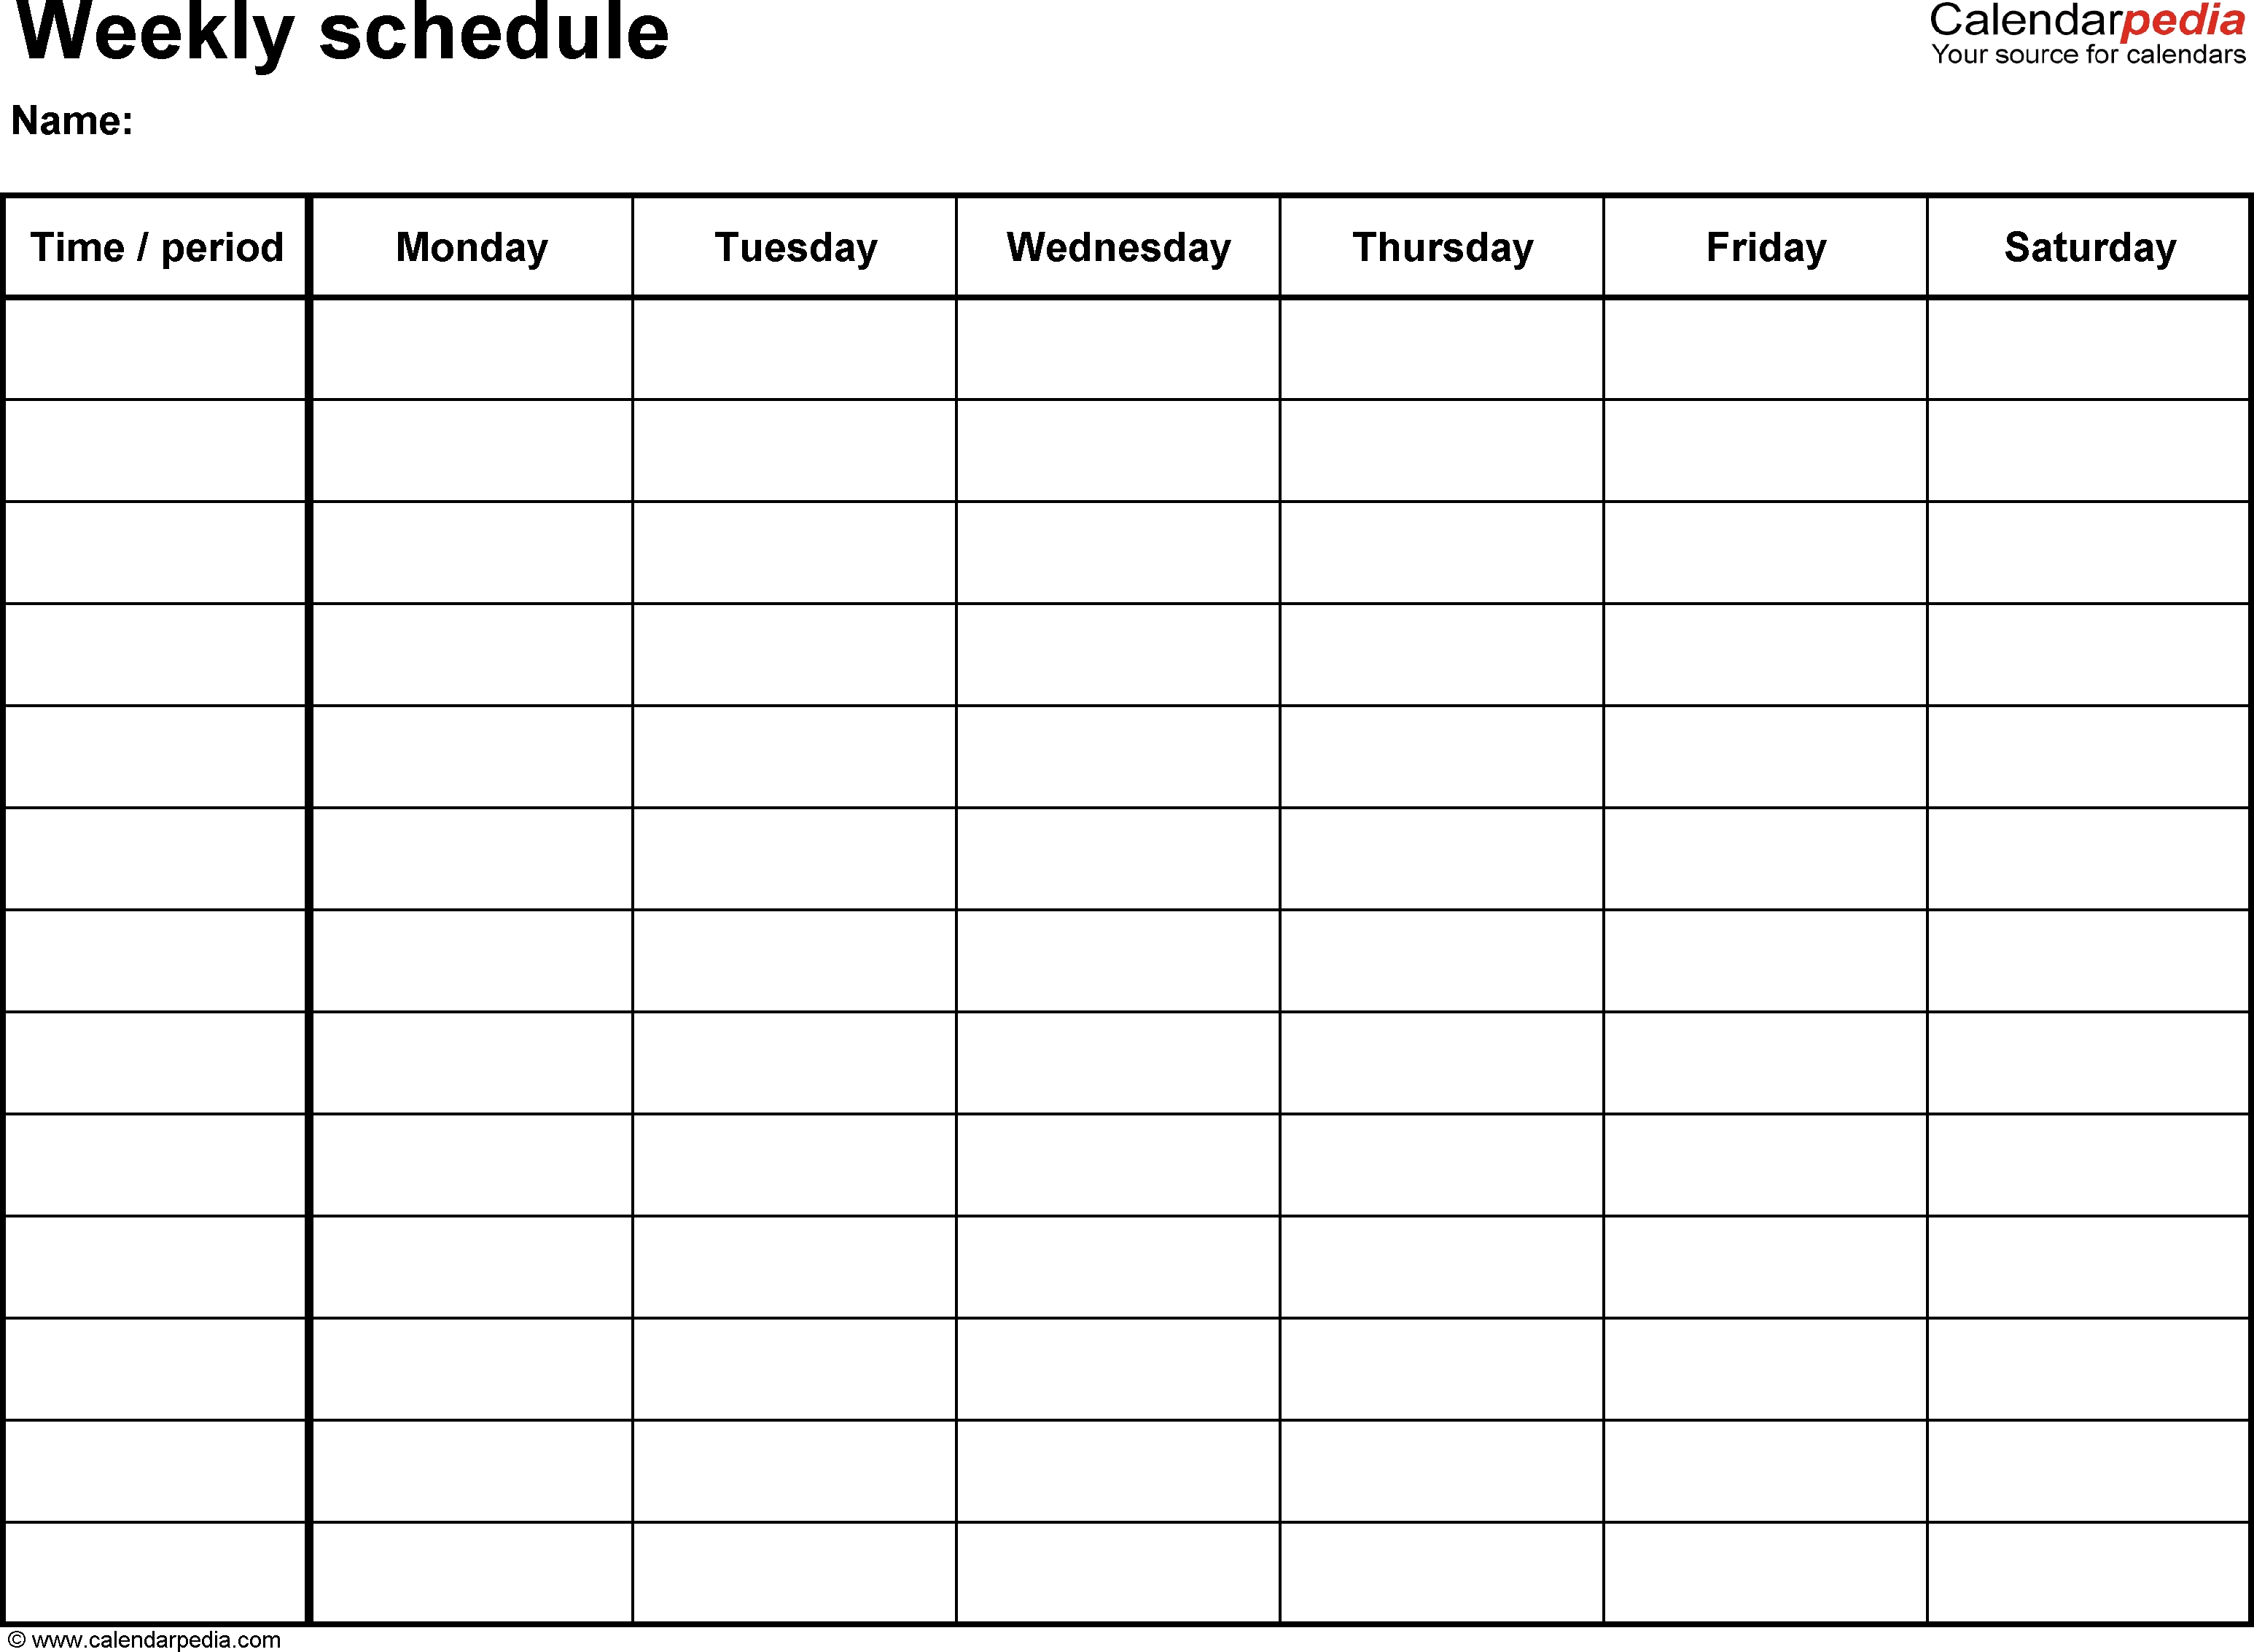 Free Weekly Schedule Templates For Word - 18 Templates Calendar Template Blank Printable Editable